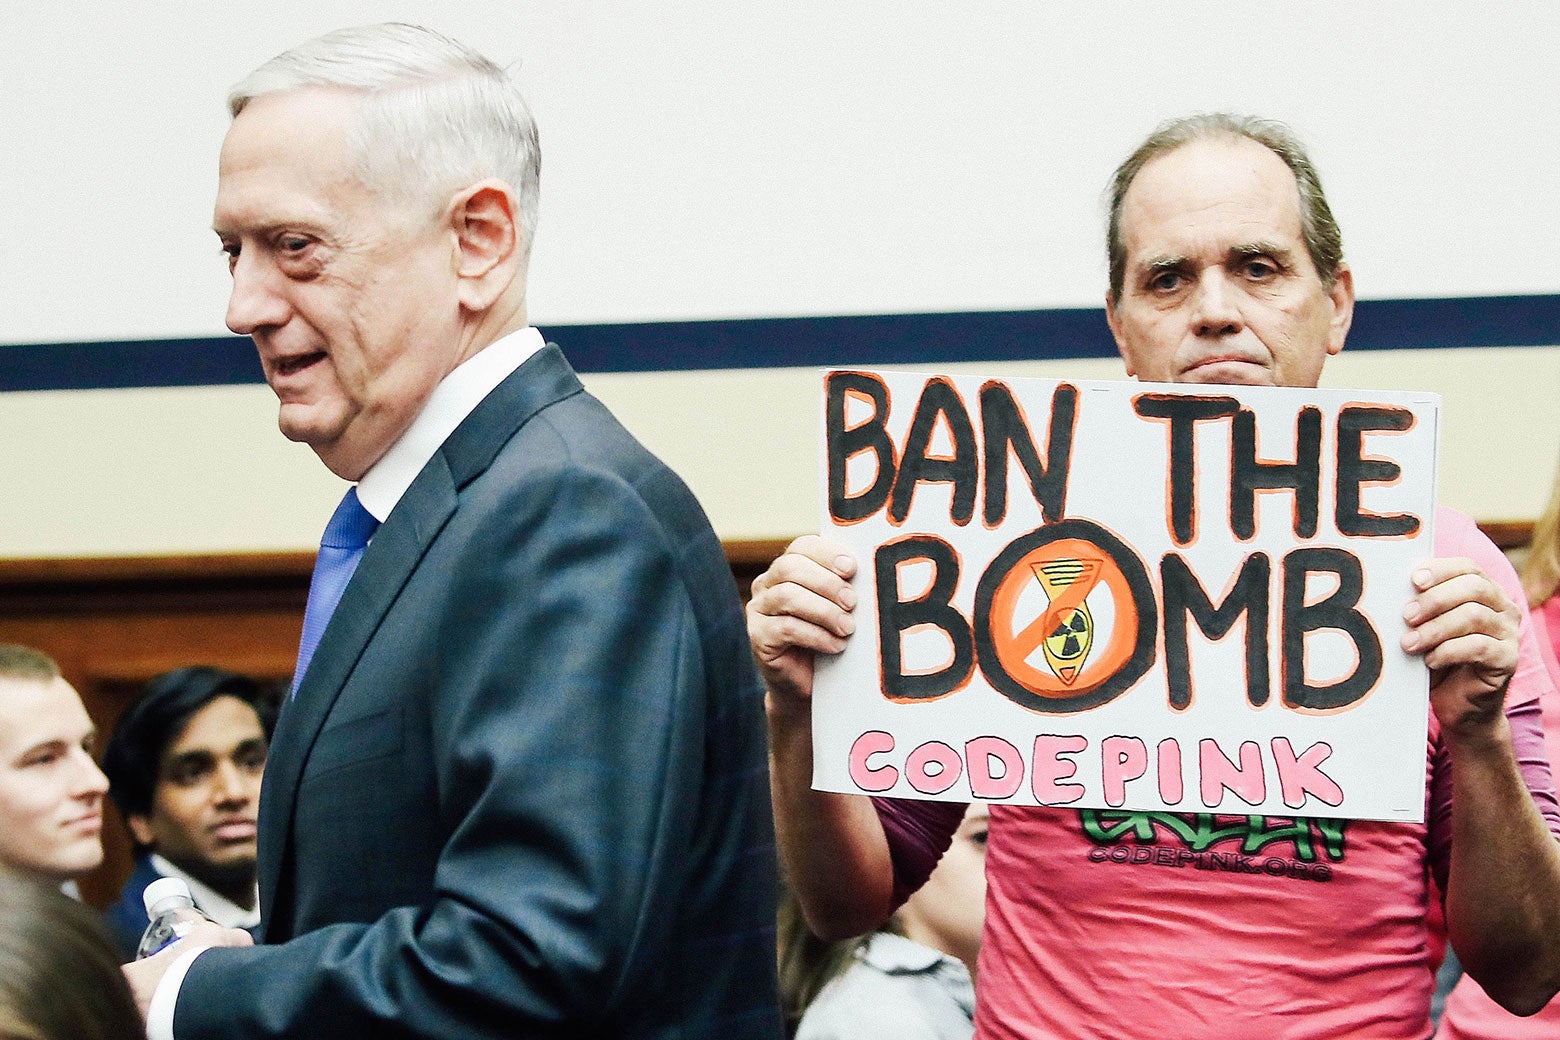 Defense Secretary Jim Mattis walks past a protester holding a sign that says, "BAN THE BOMB. CODE PINK."